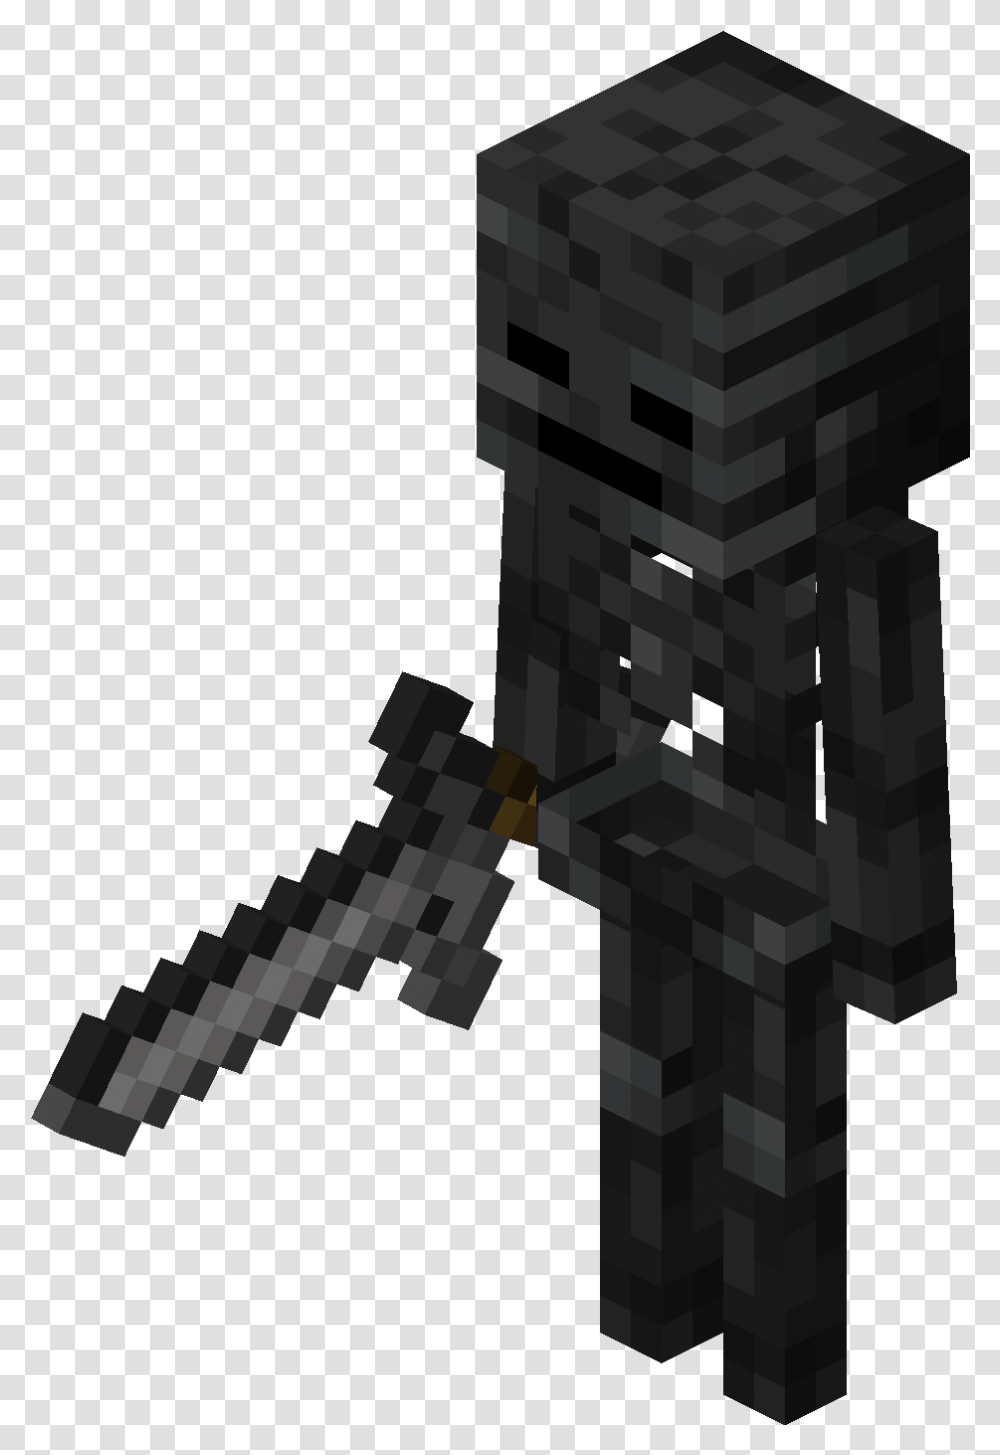 Minecraft Wither Skeleton, Cross, Key, Silhouette Transparent Png